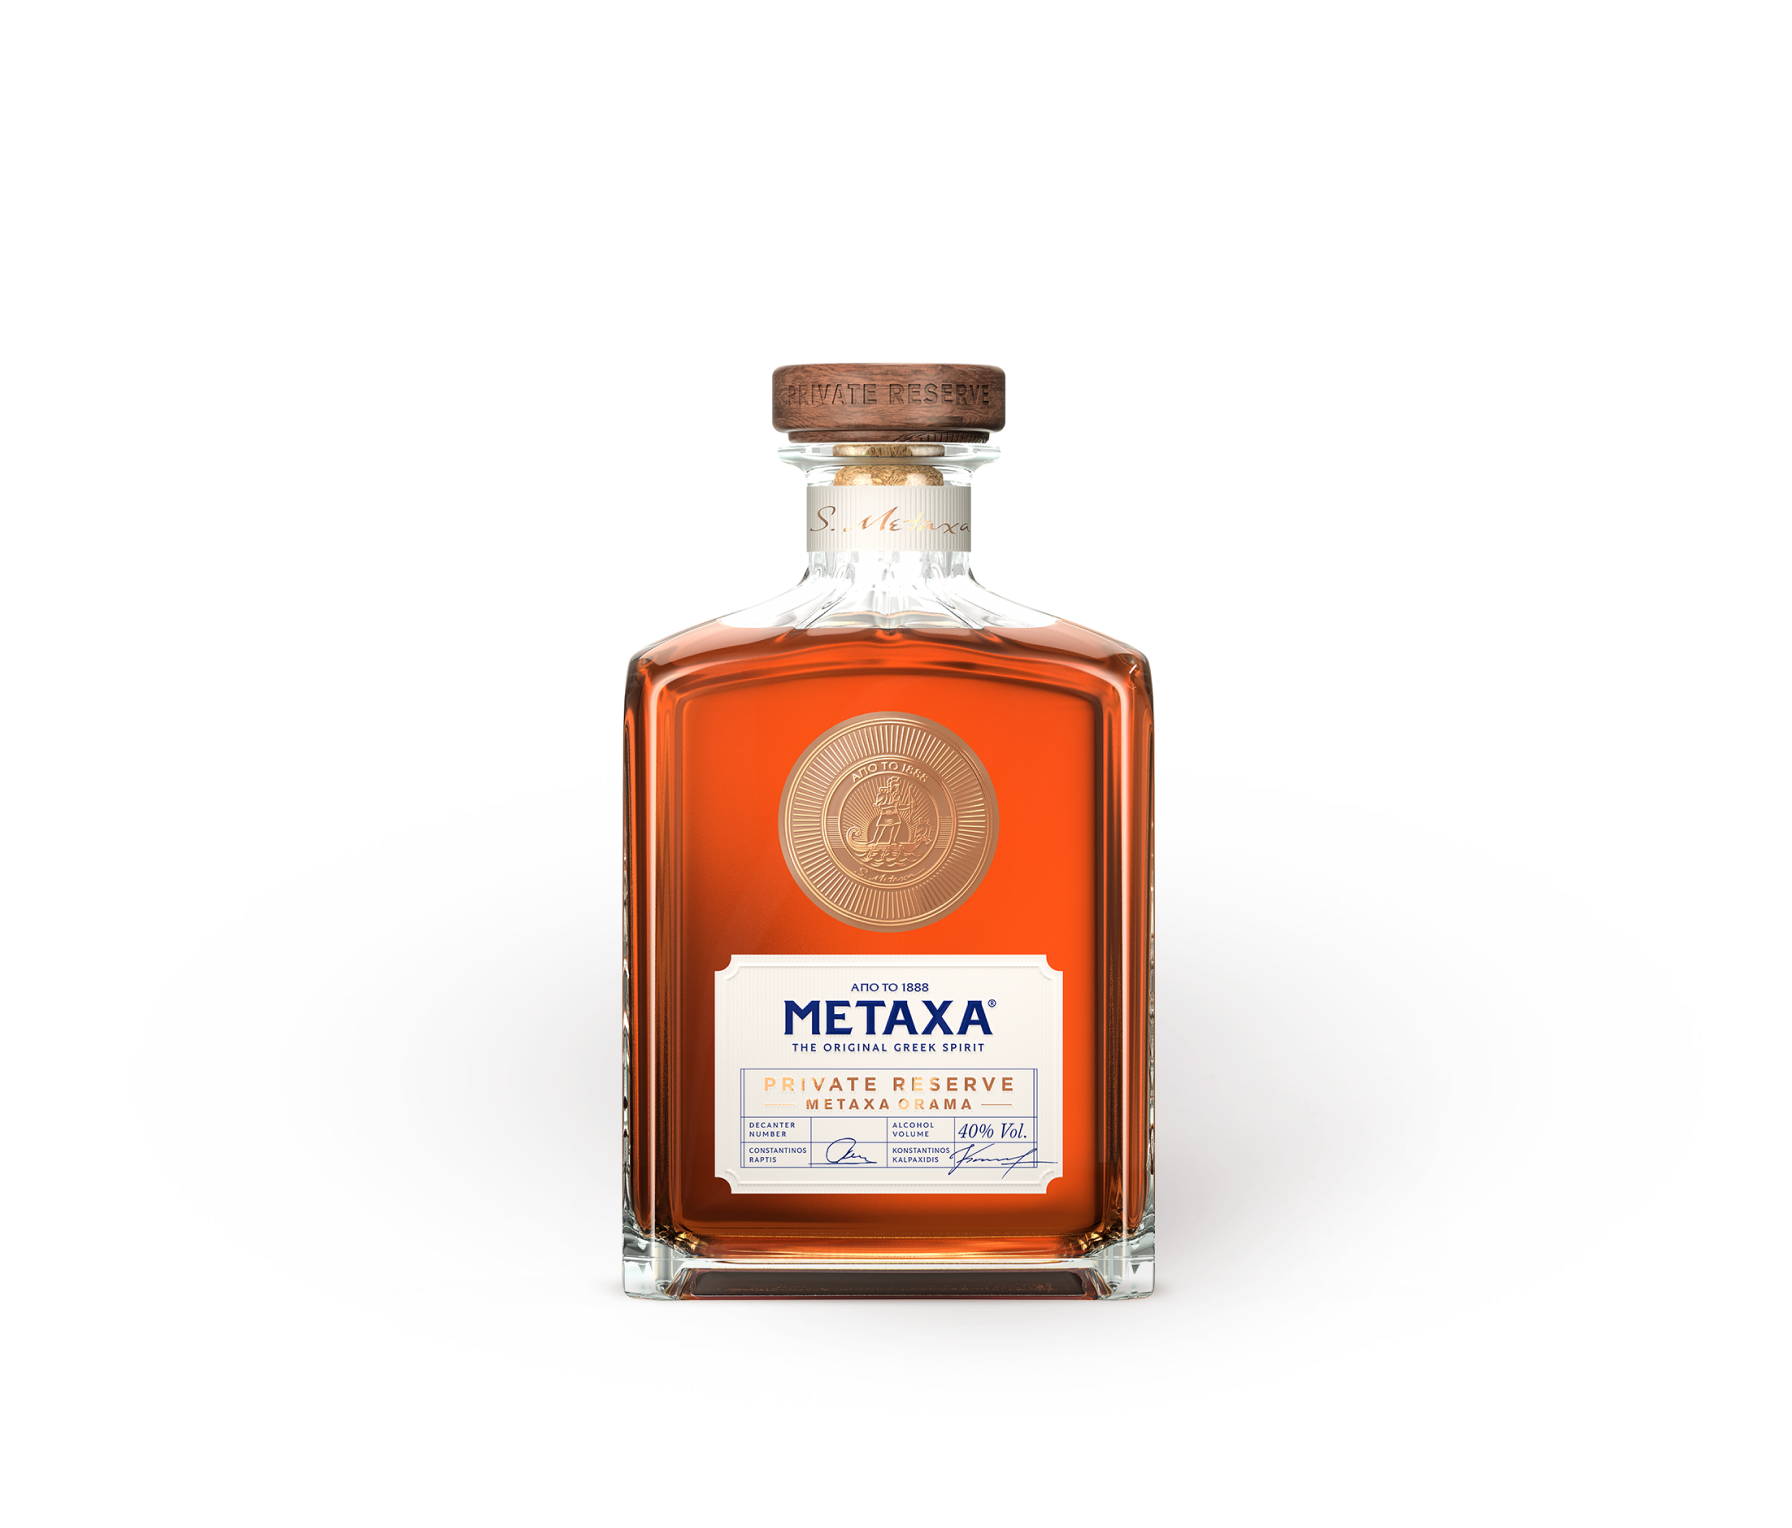 dried Stars fruit notes 12 - spicy with METAXA